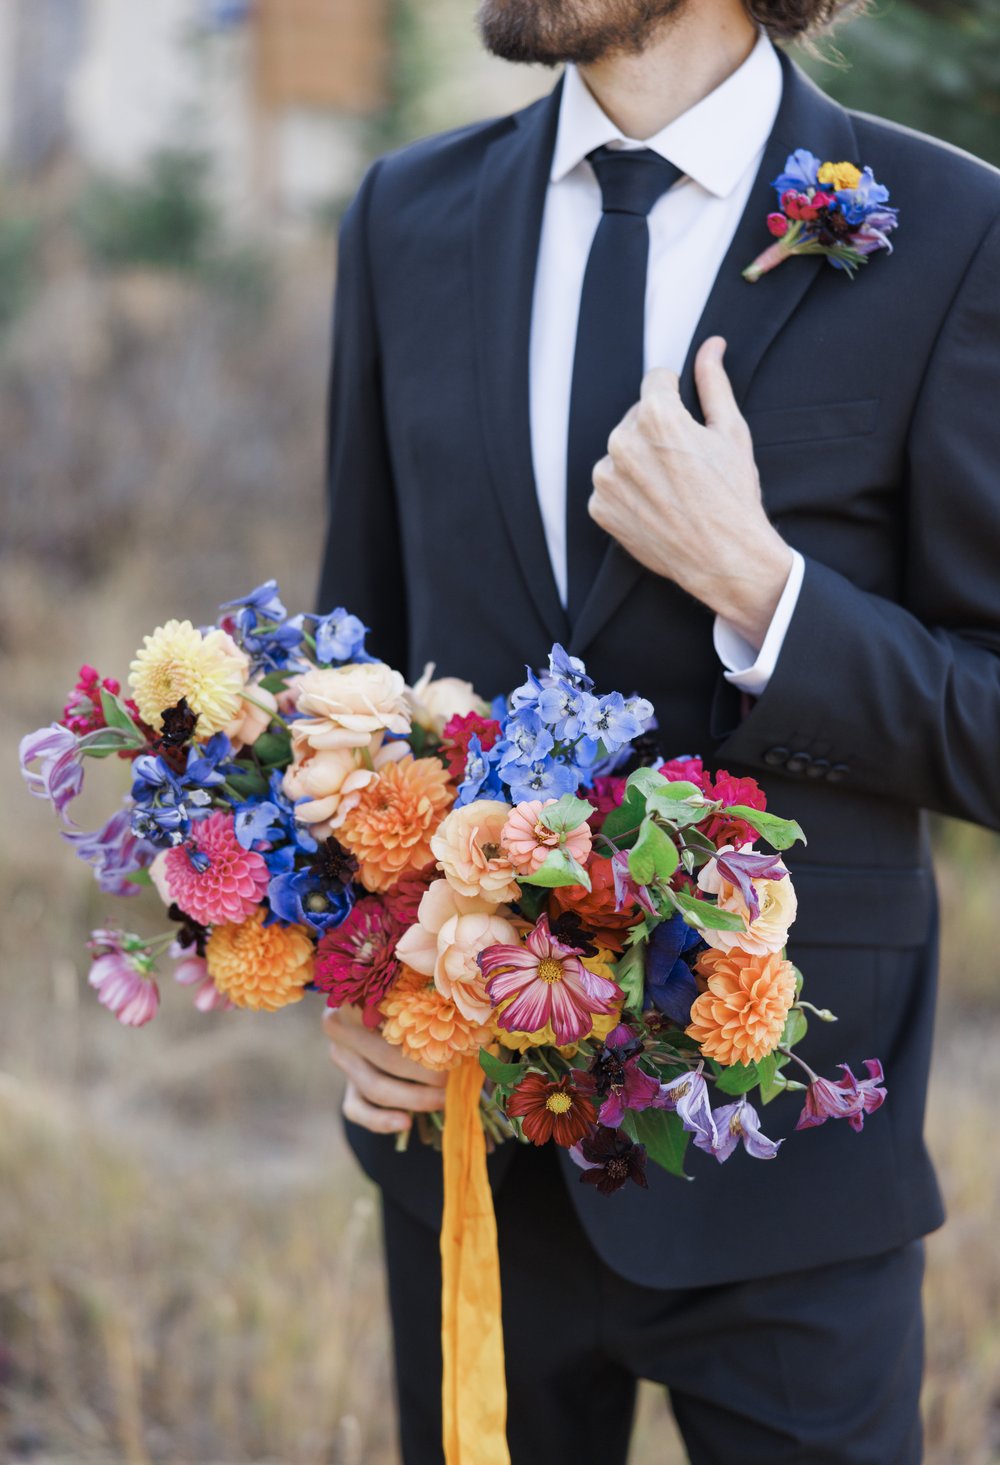  Fall floral bouquet with orange and blue accents captured by Savanna Richardson Photography. bridal bouquets #SavannaRichardsonPhotography #SavannaRichardsonWeddings #bridals #formals #bouquets #Utahweddingphotographers #ProfessionalWedPhotographers